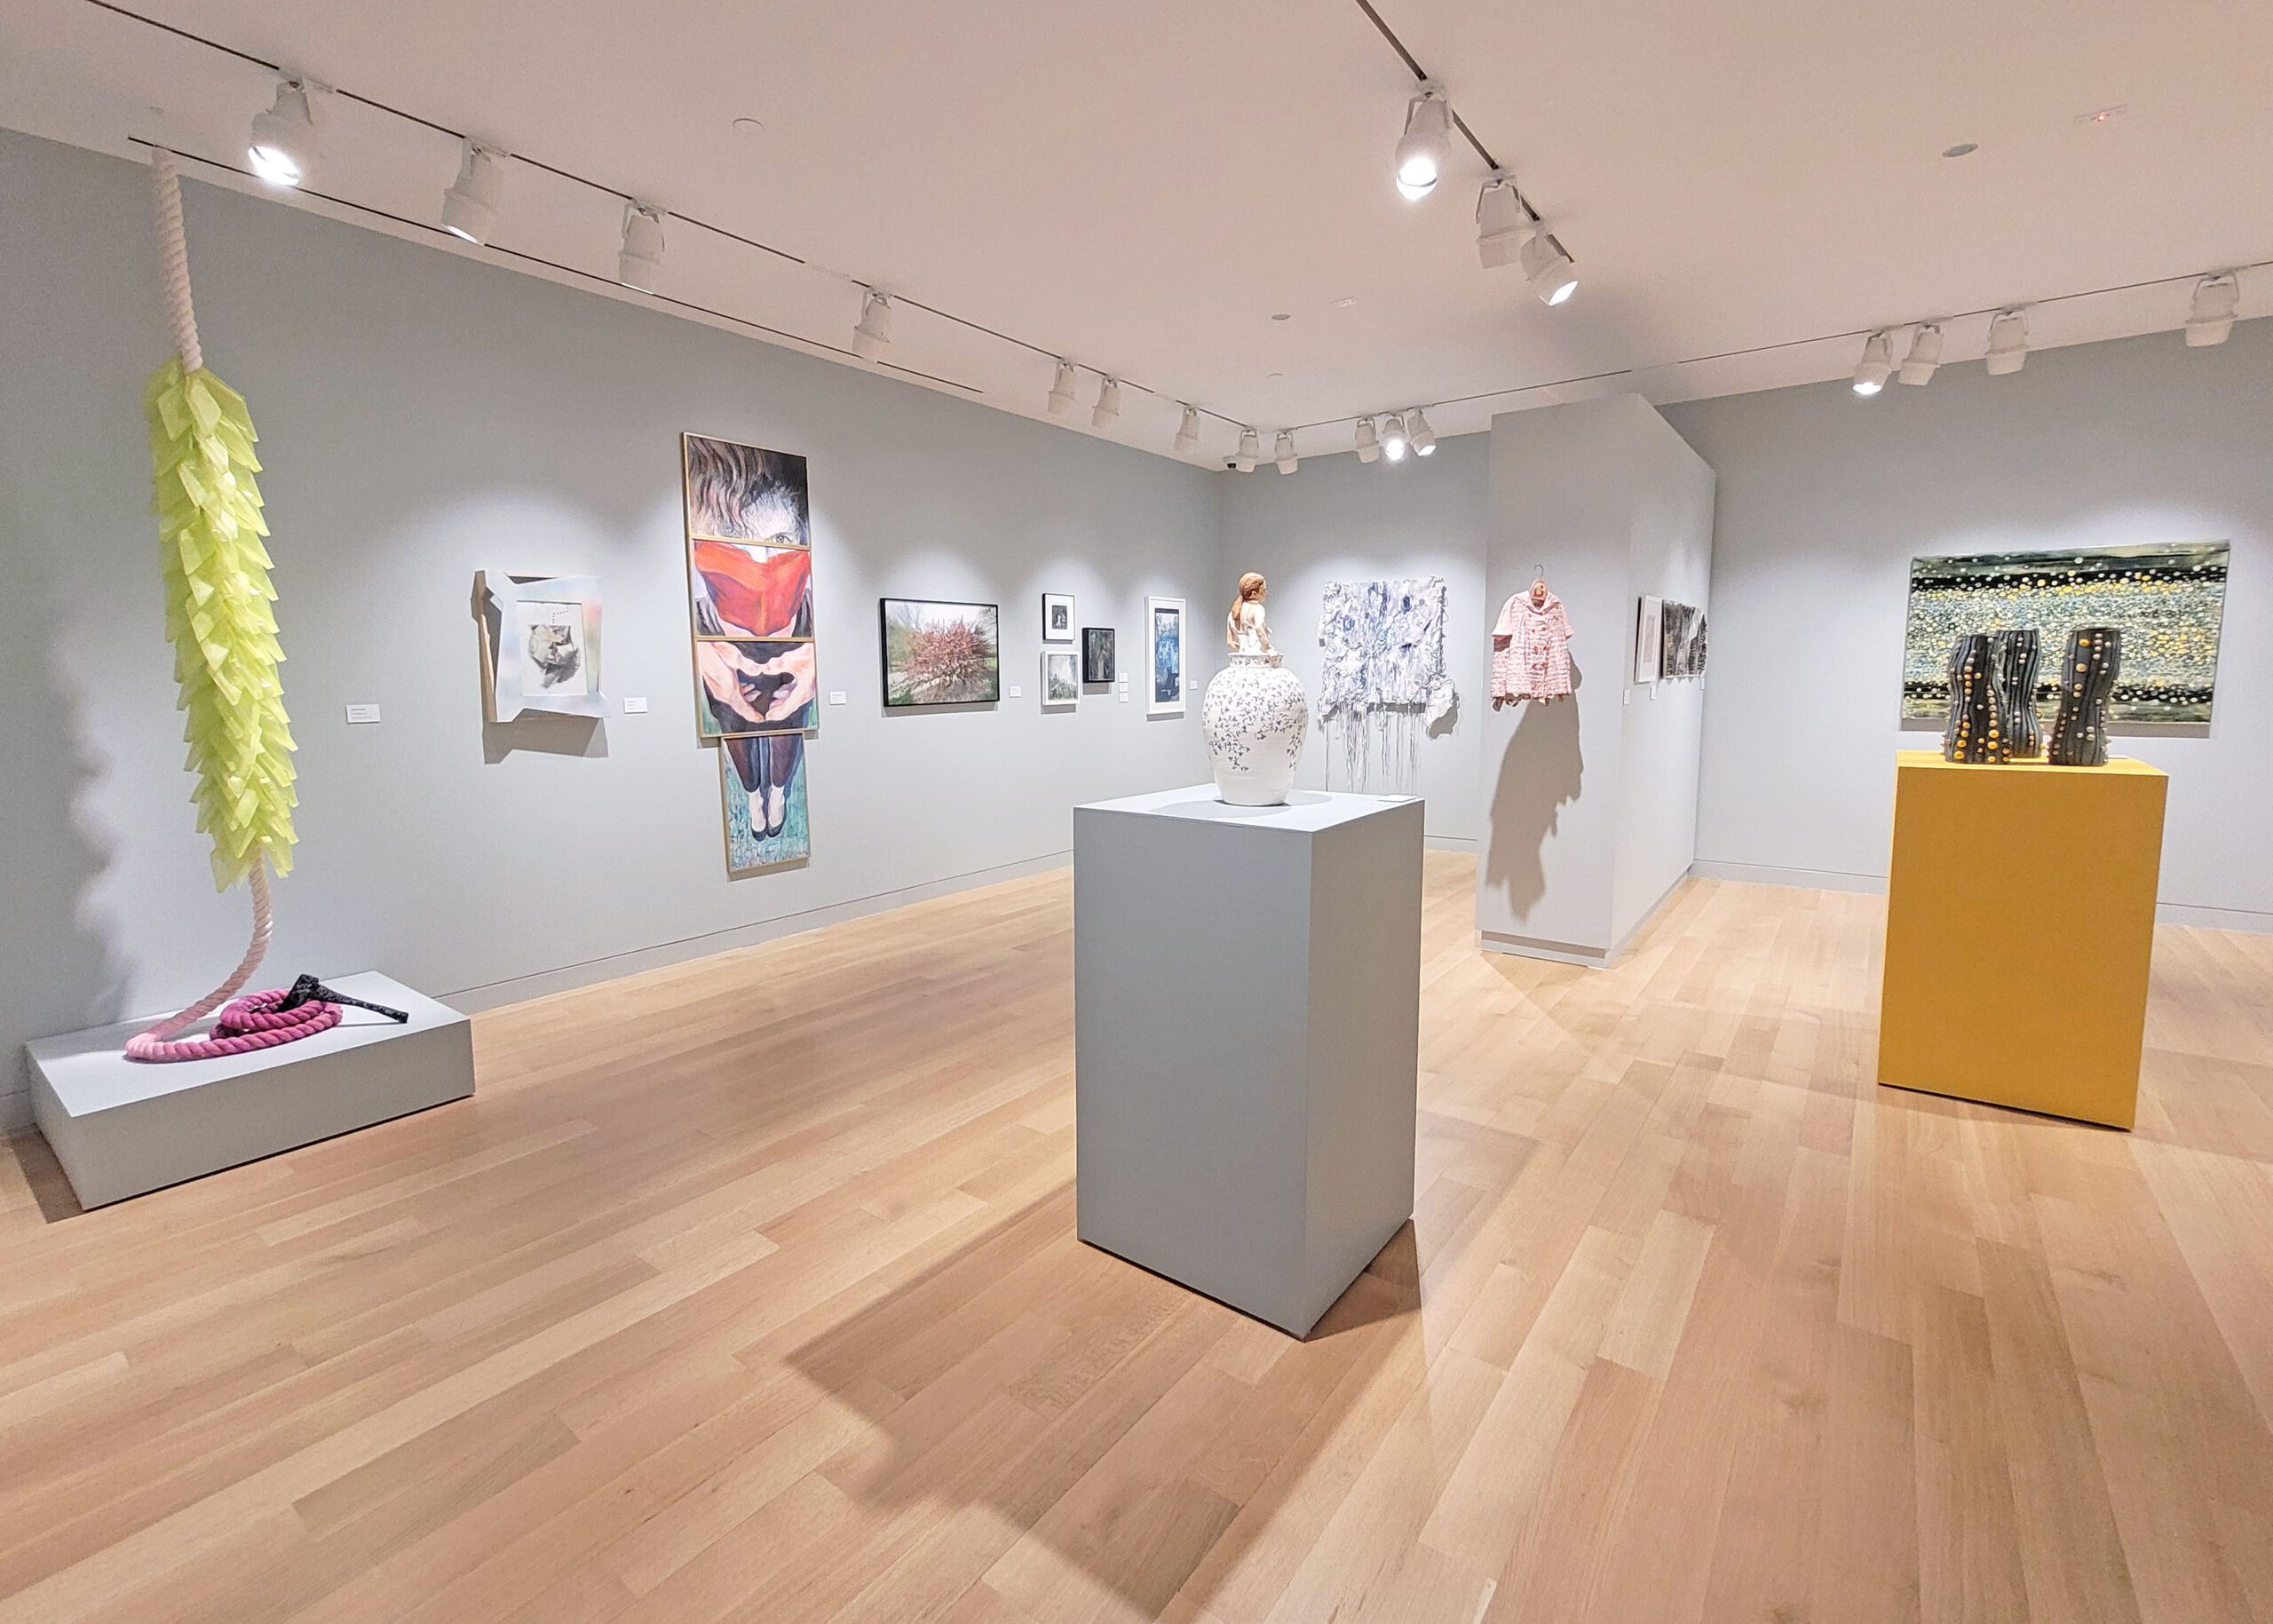 Photograph of a gallery installation with grey walls. There are various works hung on the walls, including two fabric pieces hanging from the ceiling. There are also to pedestals, one grey and one yellow, with ceramic works on top.